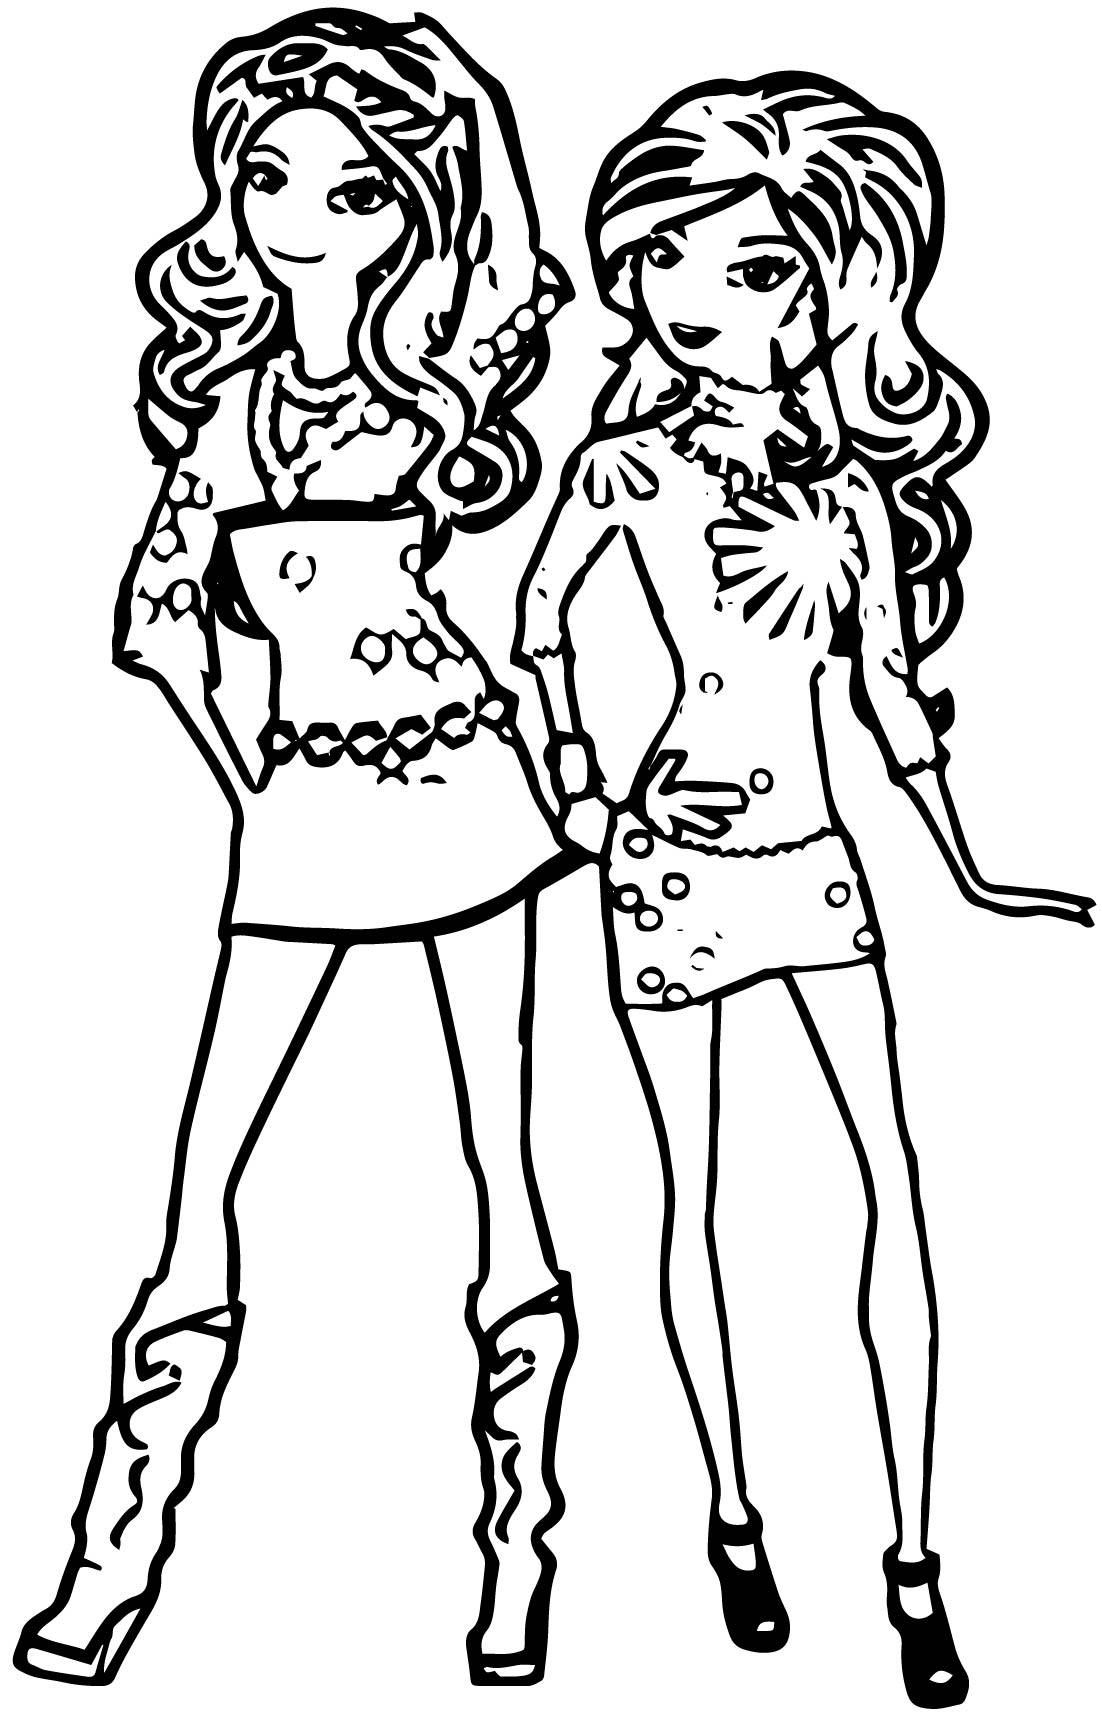 The best free Bff coloring page images. Download from 141 free coloring ...